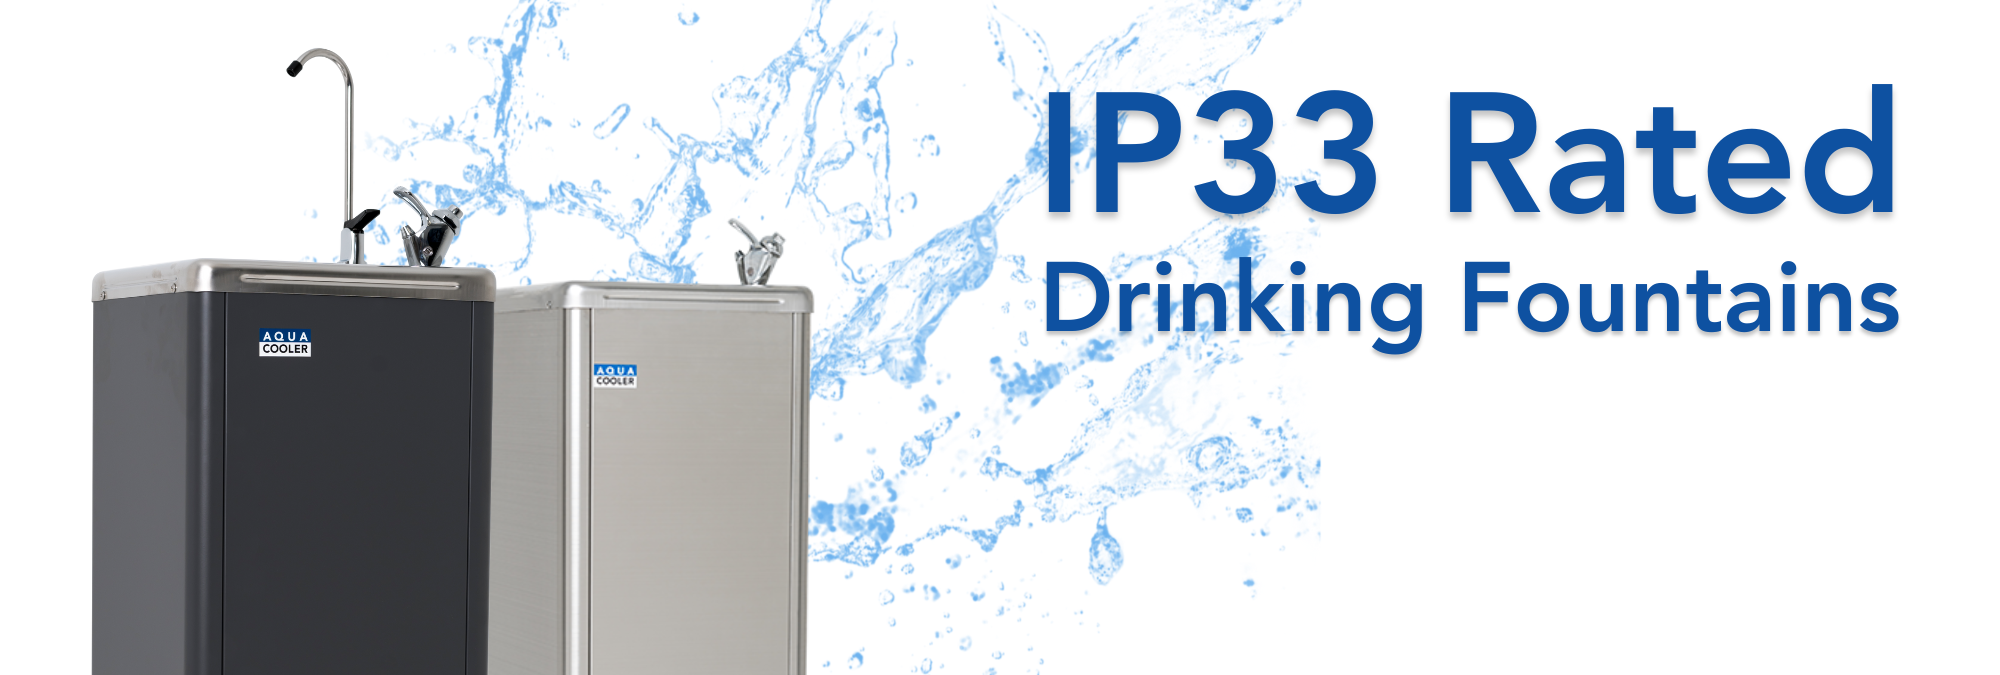 IP33 Rated Drinking Fountains